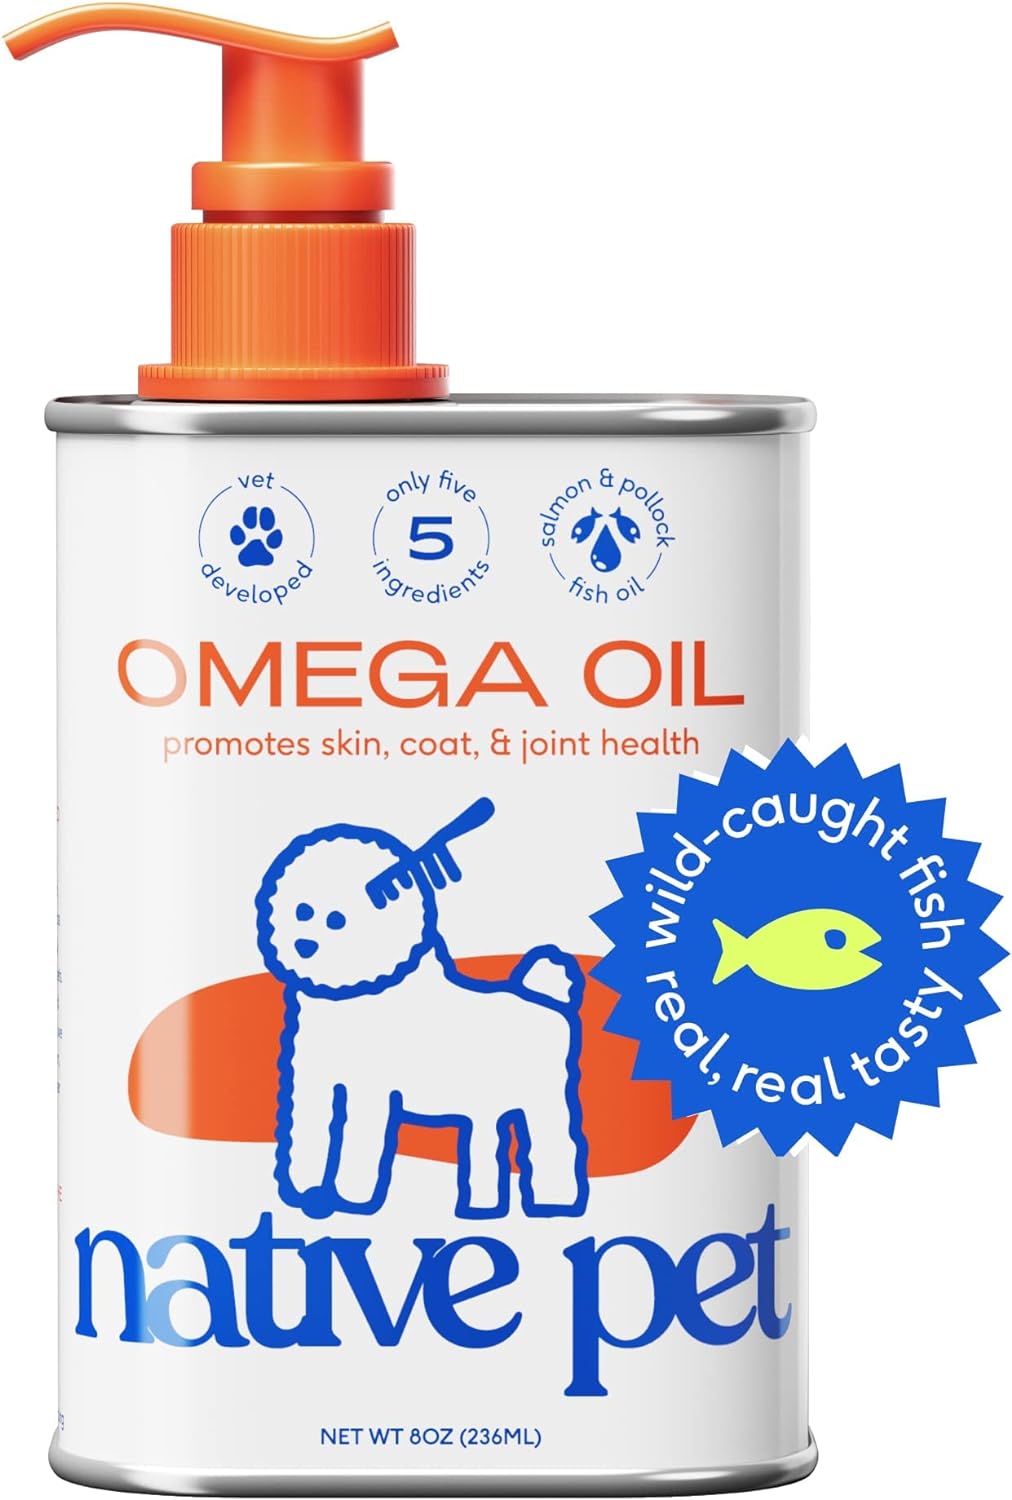 Native Pet Omega 3 Fish Oil for Dogs - Made with Wild Alaskan Salmon Oil with Omega 3 EPA DHA - Supports Itchy Skin + Mobility - Liquid Pump is Easy to Serve - a Fish Oil Dogs Love! (8 oz)